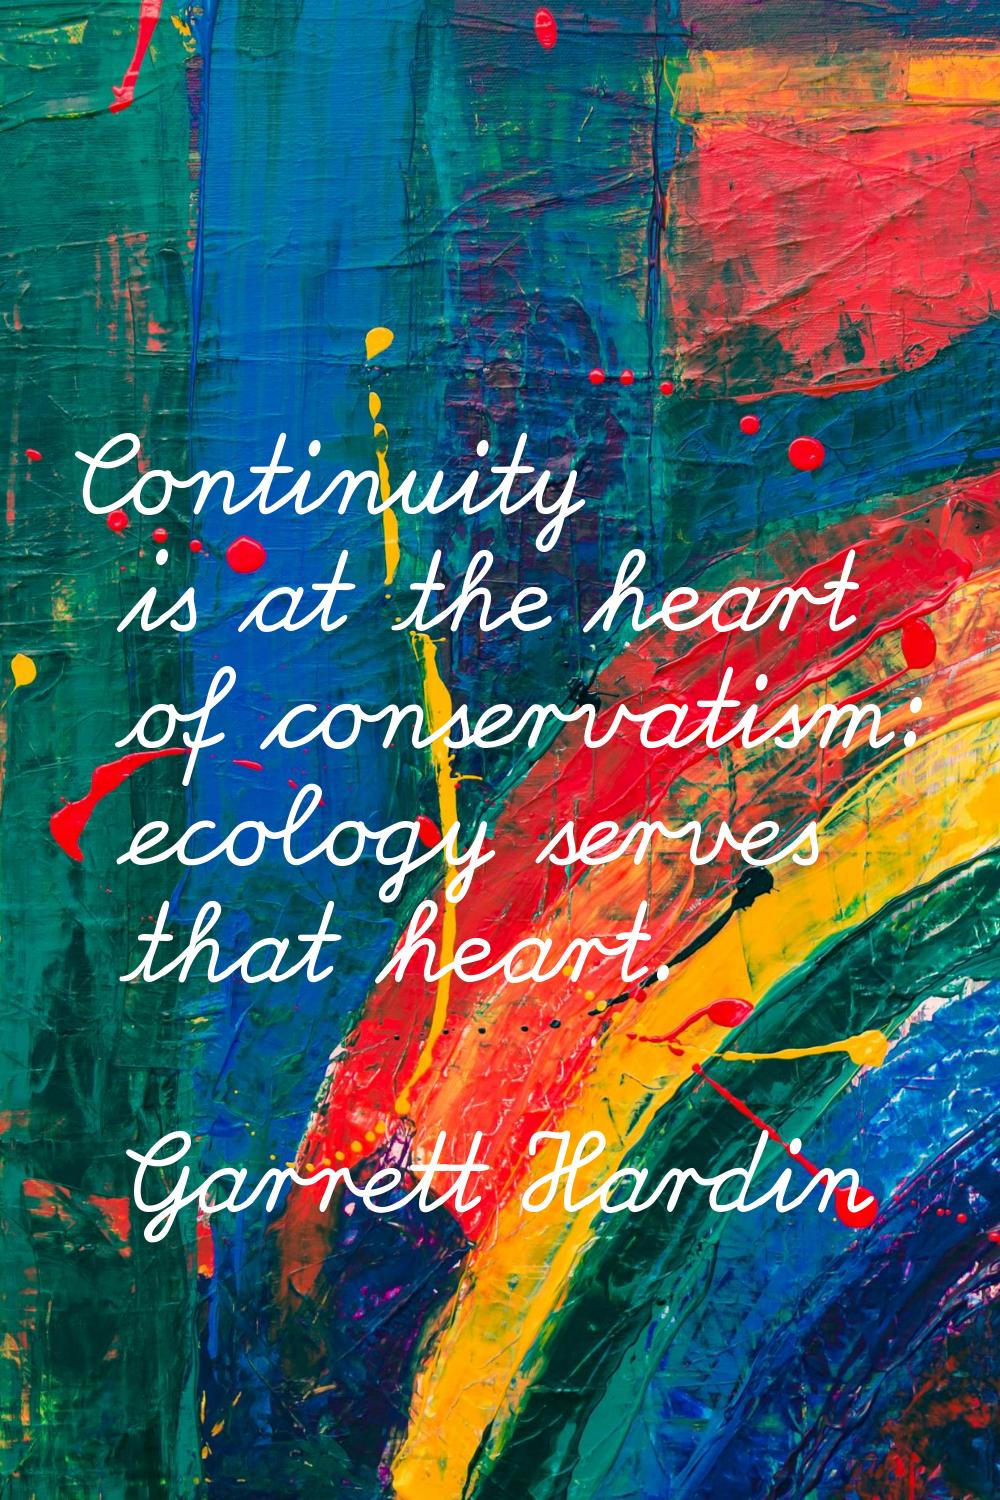 Continuity is at the heart of conservatism: ecology serves that heart.